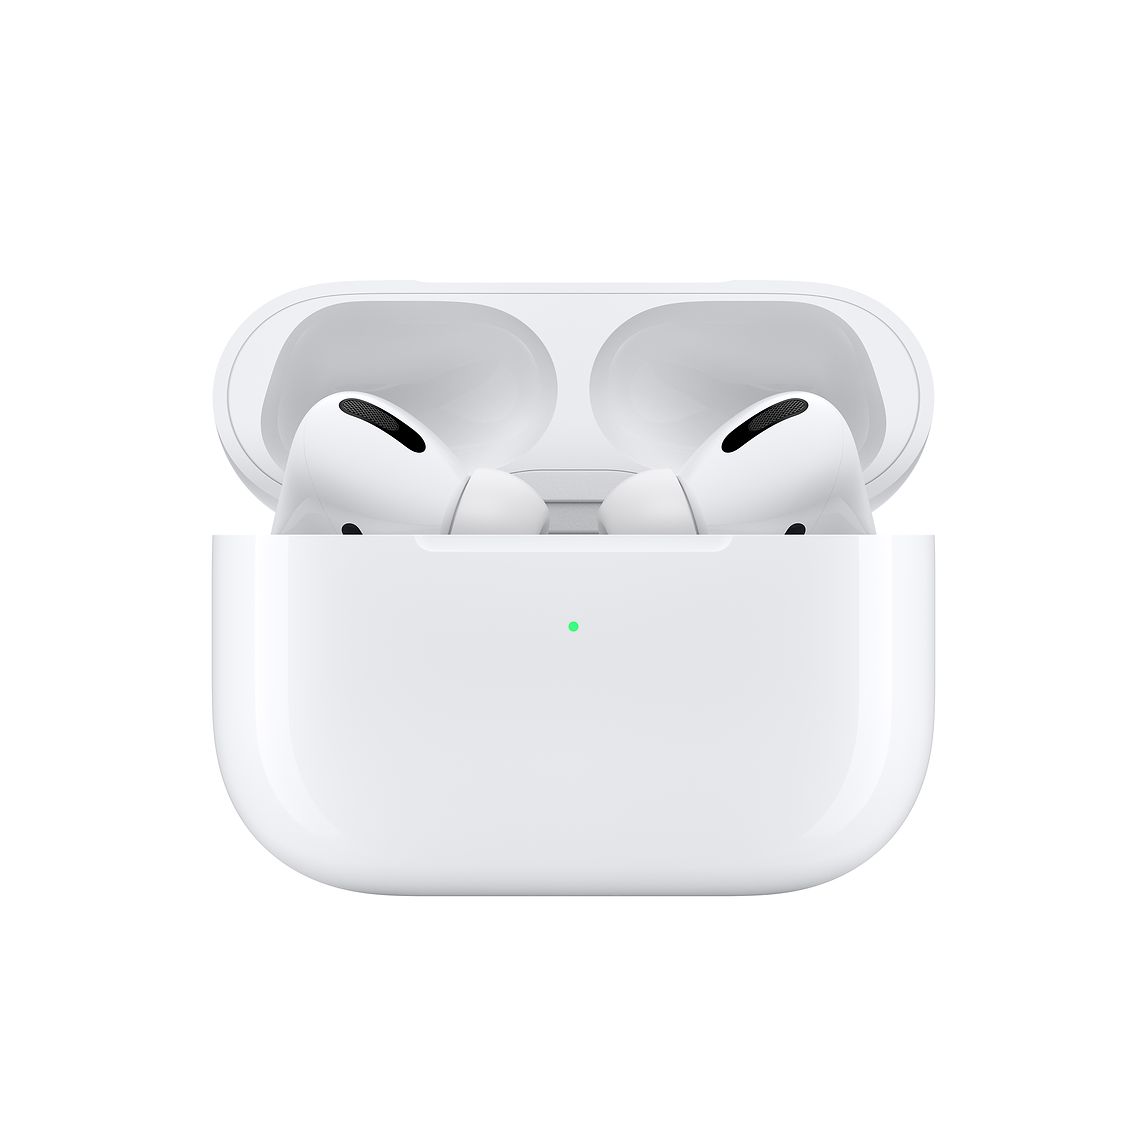 AirPods Pro selling on Amazon for record-low price - www.semadata.org News